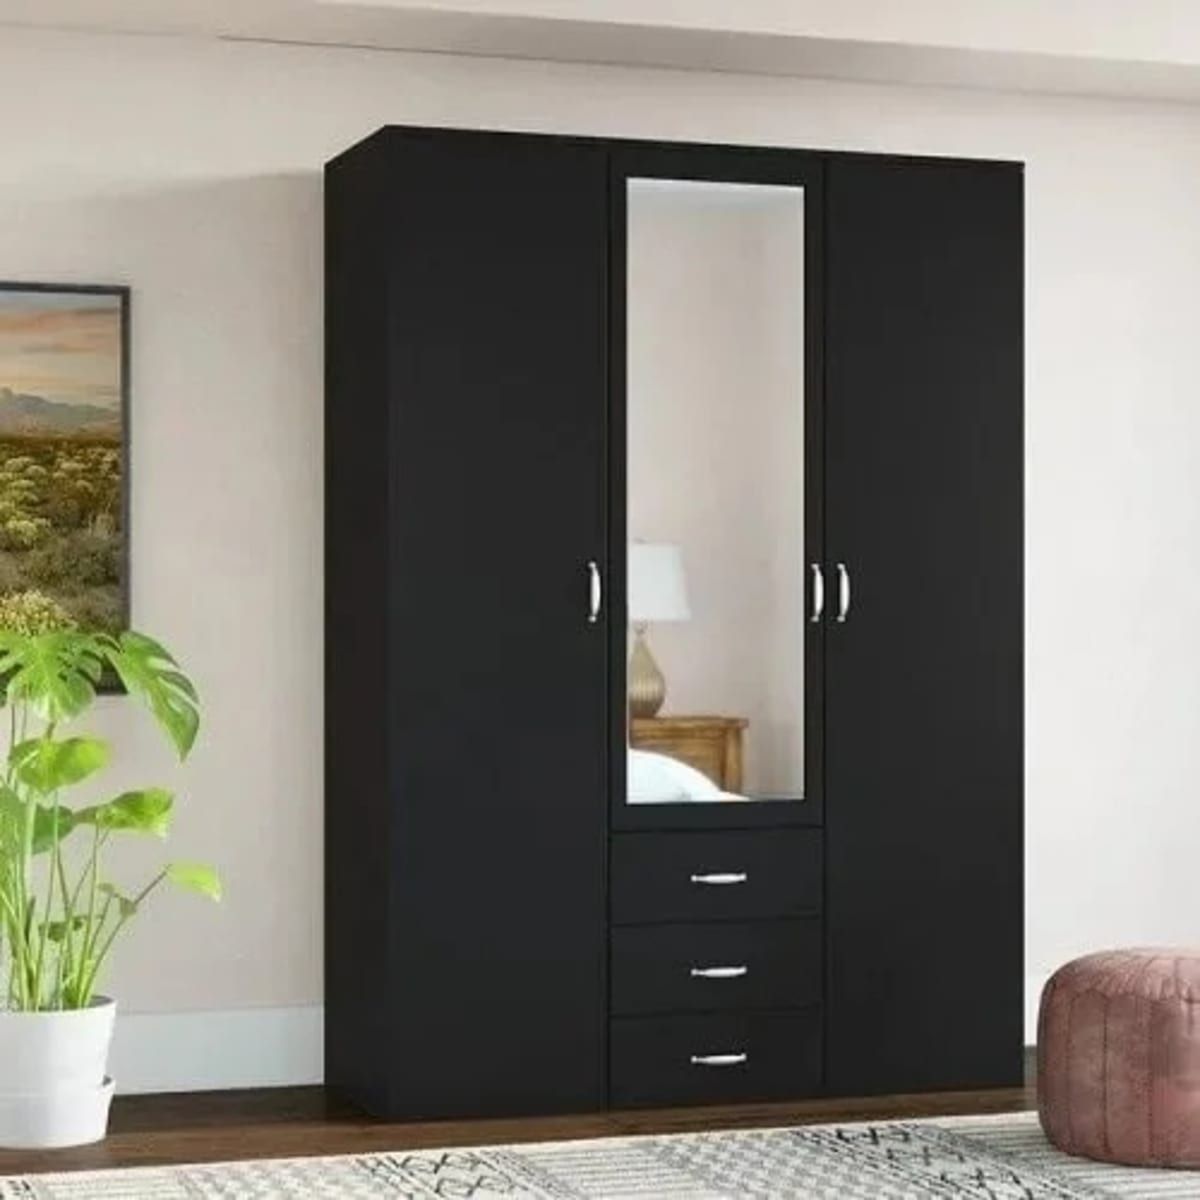 Vic Beads 3 Door Wardrobe With 3 Drawer And Mirror – Black | Konga Online  Shopping Throughout Wardrobes With 3 Drawers (View 10 of 15)